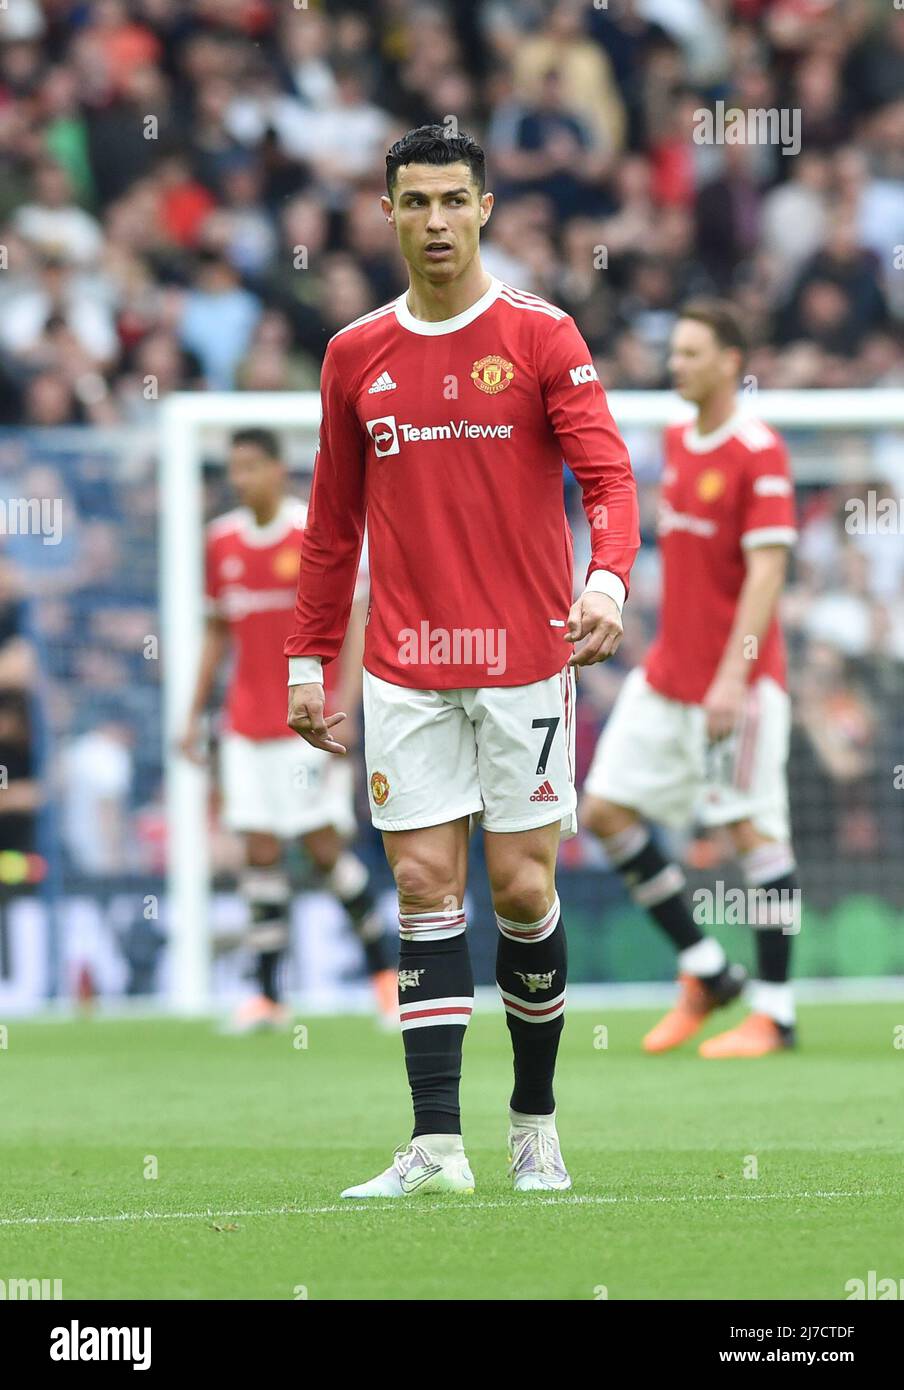 Cristiano Ronaldo of Manchester United during  the Premier League match between Brighton and Hove Albion and Manchester United at the American Express Stadium  , Brighton , UK - 7th May 2022  Photo Simon Dack/Telephoto ImagesEditorial use only. No merchandising. For Football images FA and Premier League restrictions apply inc. no internet/mobile usage without FAPL license - for details contact Football Dataco Stock Photo